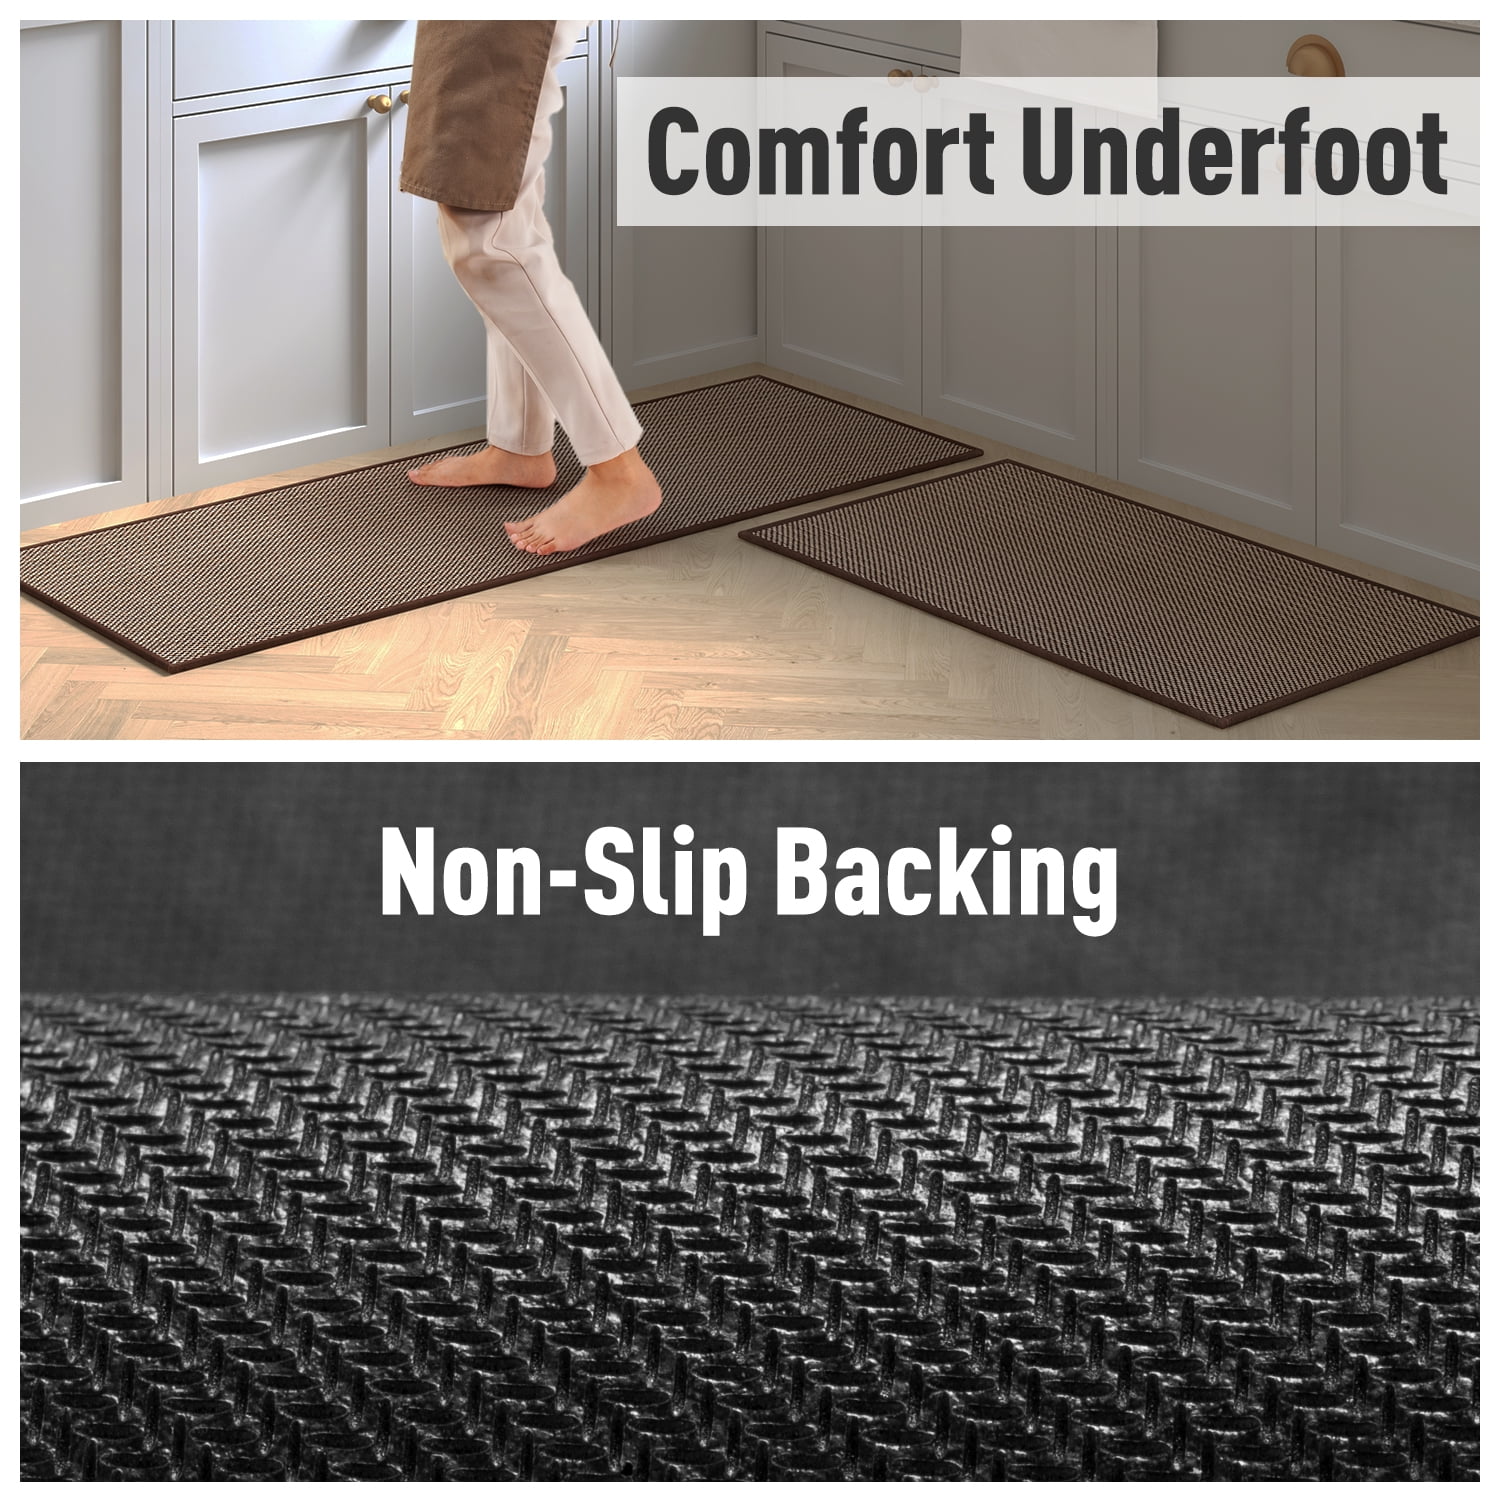 Sanmadrola Kitchen Runner Rugs and Mats 0.75'' Extra Thick Anti Fatigue  20''x47'' Waterproof Non Slip Heavy Duty Cushioned Standing Rugs and Mats  for Kitchen House Sink Office Black 